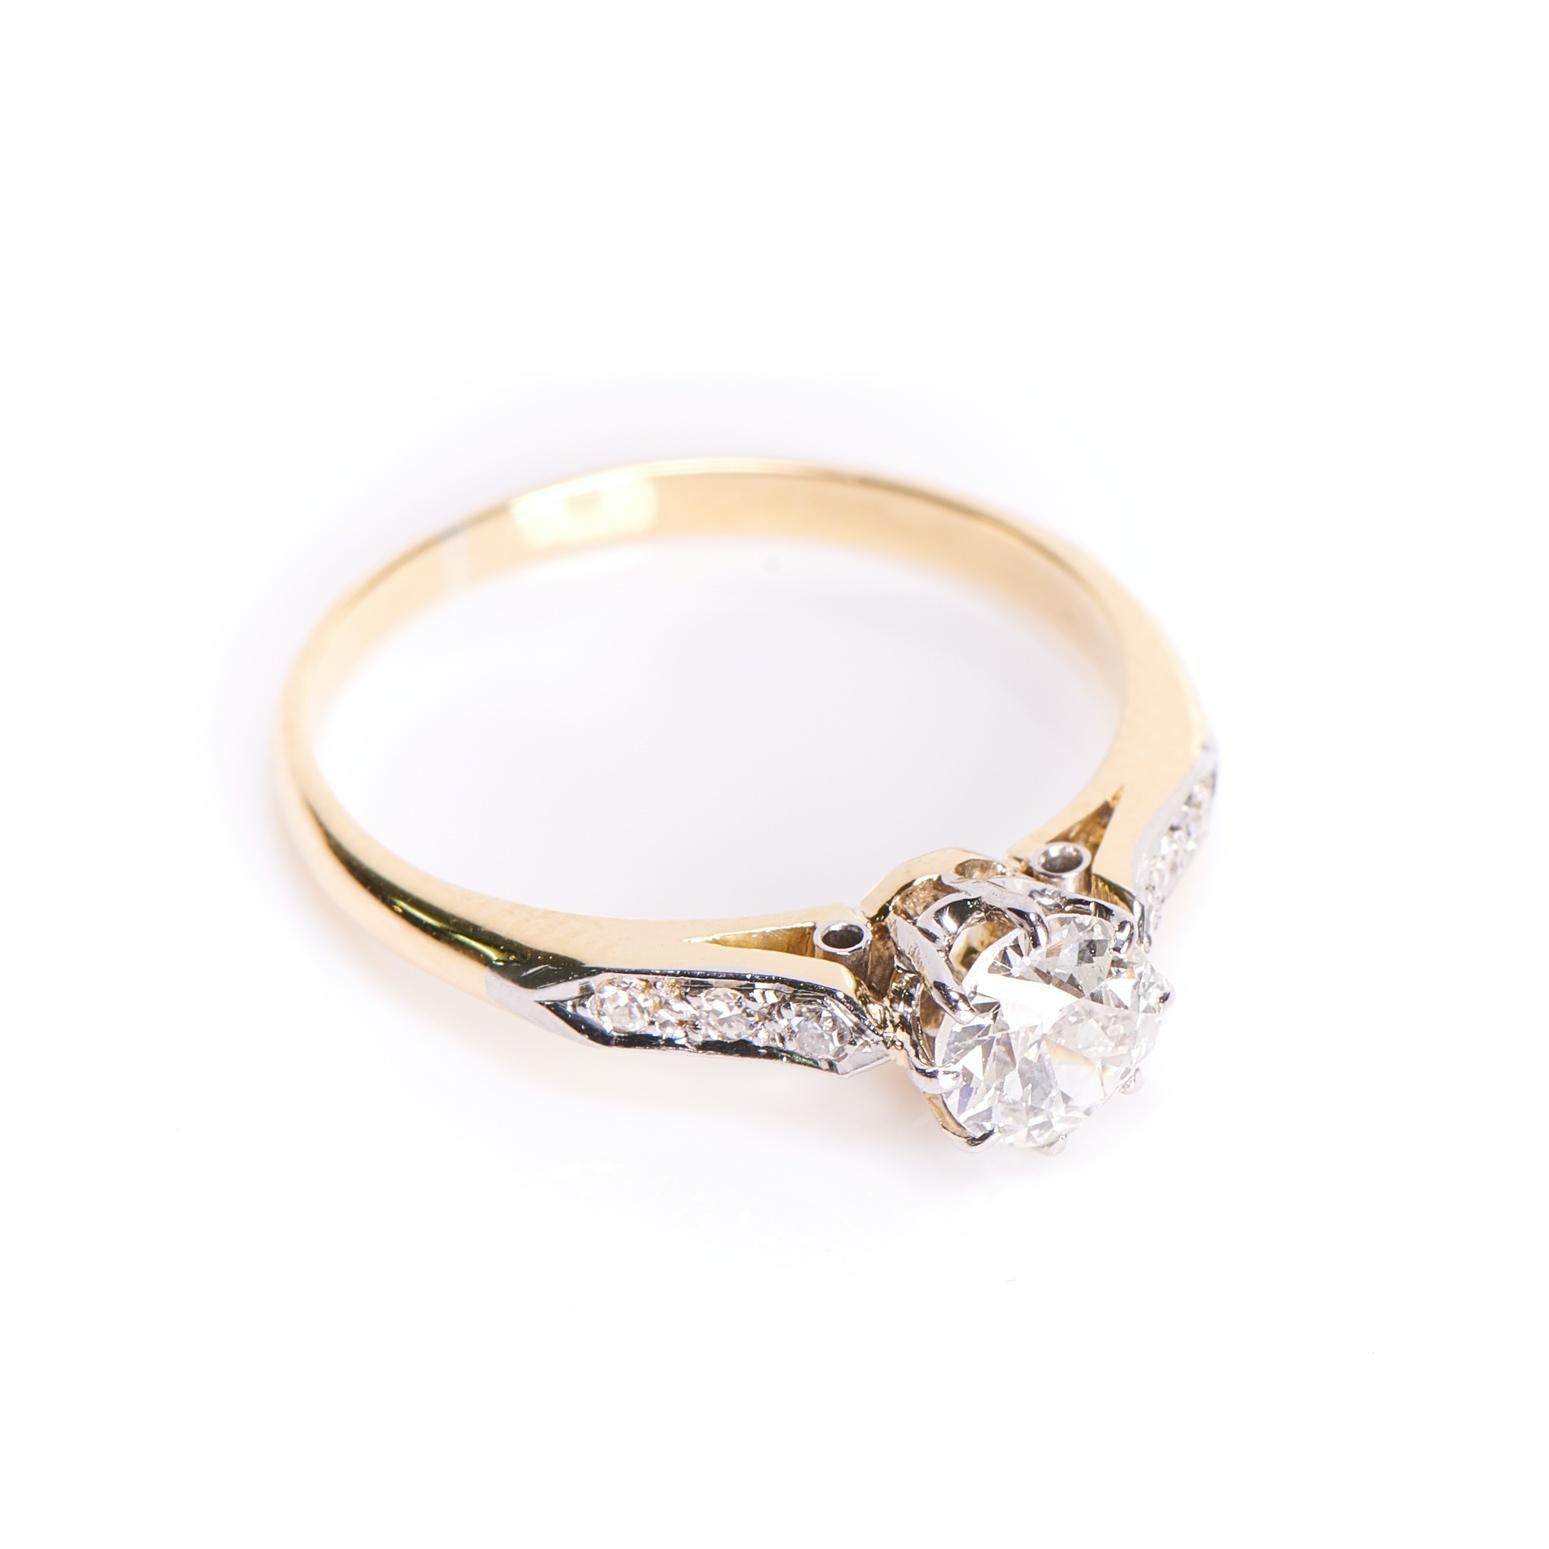 Art Deco diamond ring, circa 1920. A beautiful traditional diamond engagement ring set with a 0.50ct transitional-cut diamond in an eight-claw setting flanked by shaped diamond shoulders all set in platinum. The band is made in yellow gold adding a